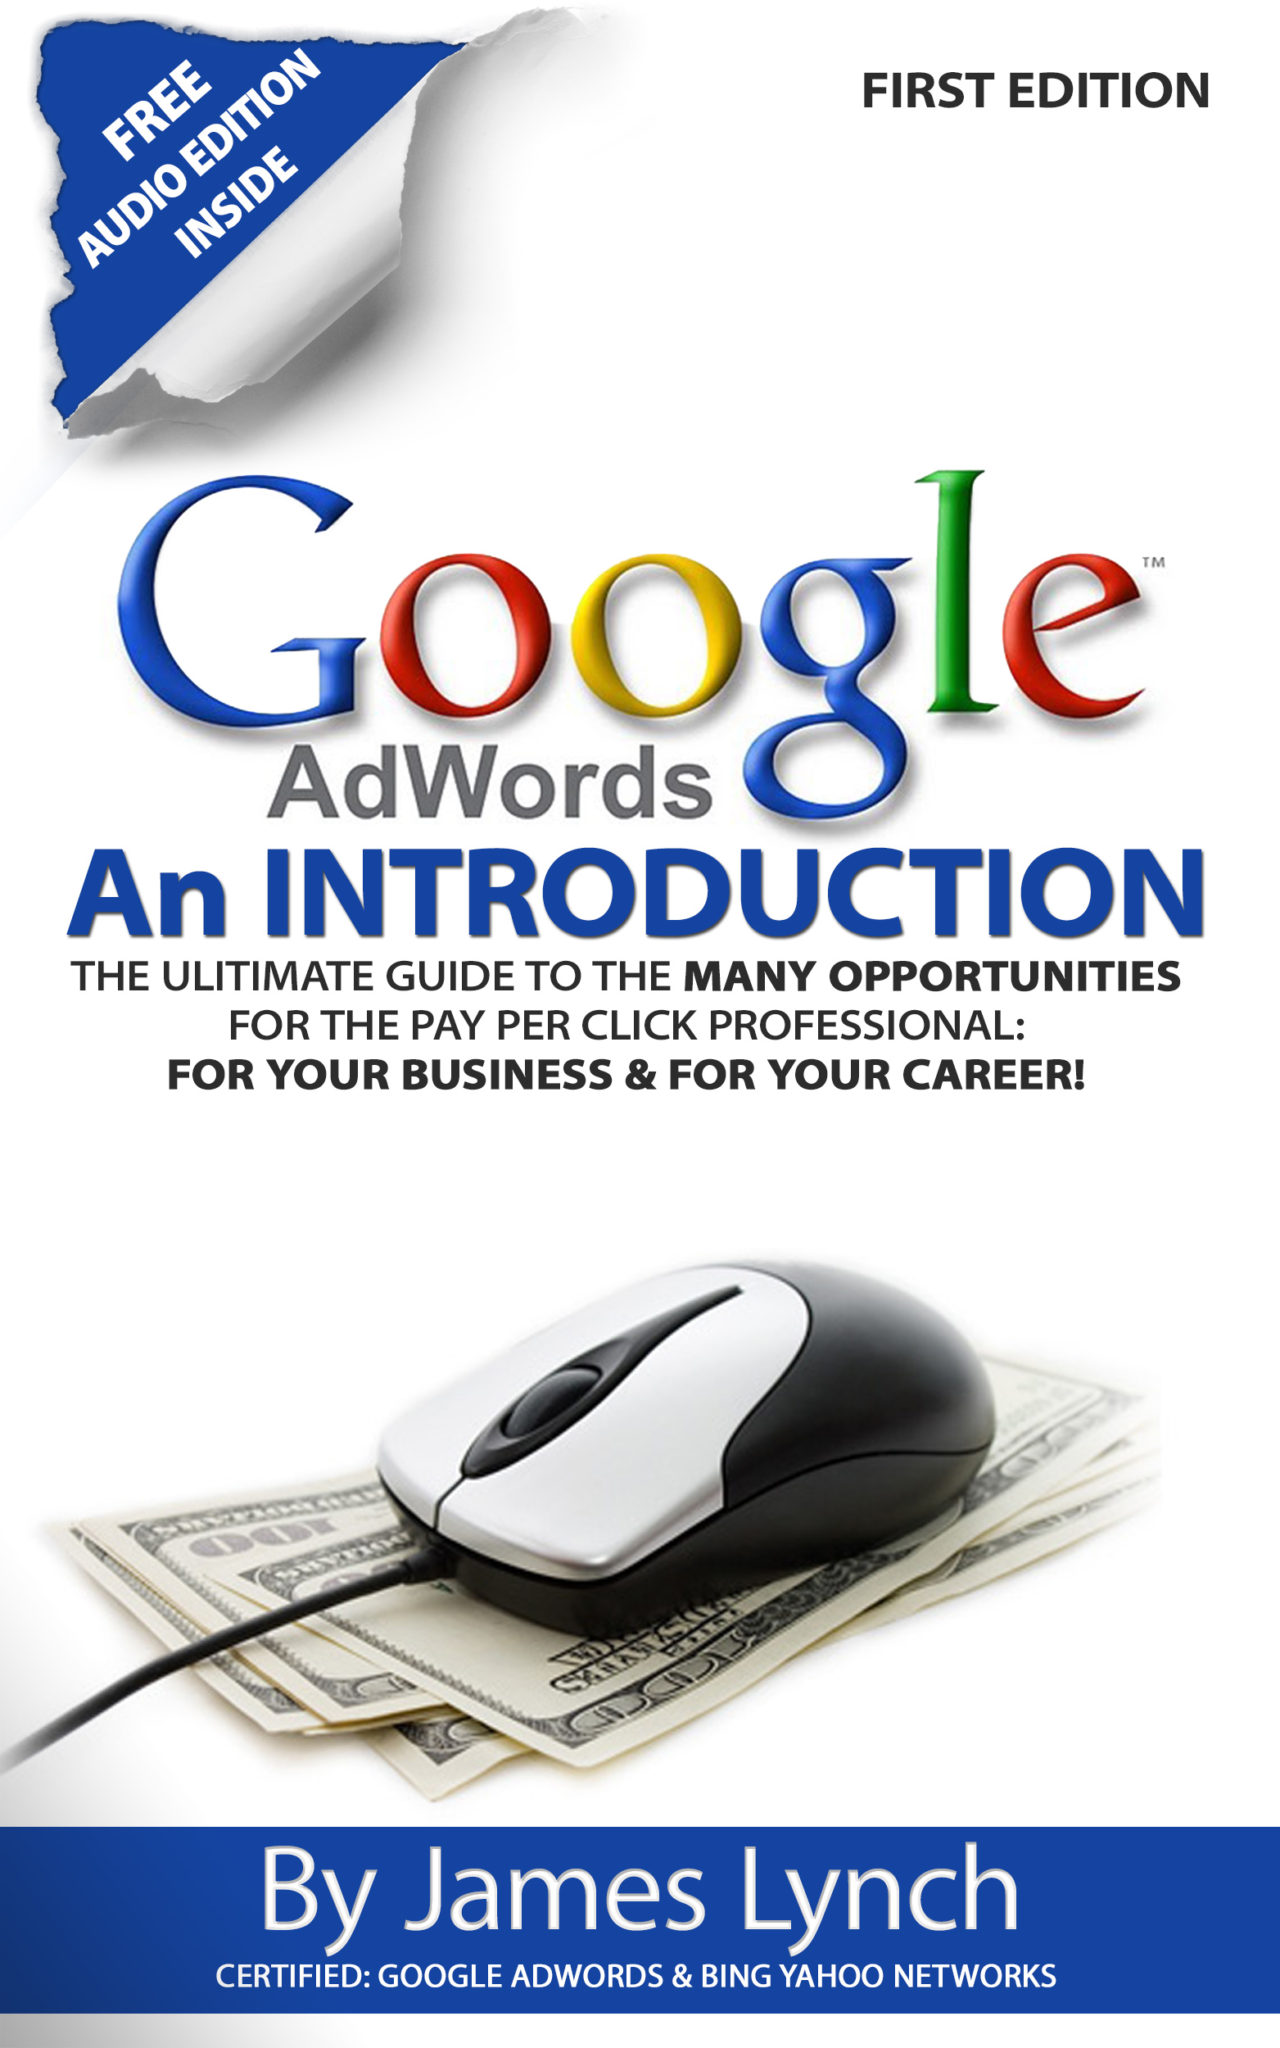 FREE: Google Adwords – An Introduction: The Ultimate Guide To The Many Opportunities for the Pay Per Click Professional: For Your Business & For Your Career! by James Lynch